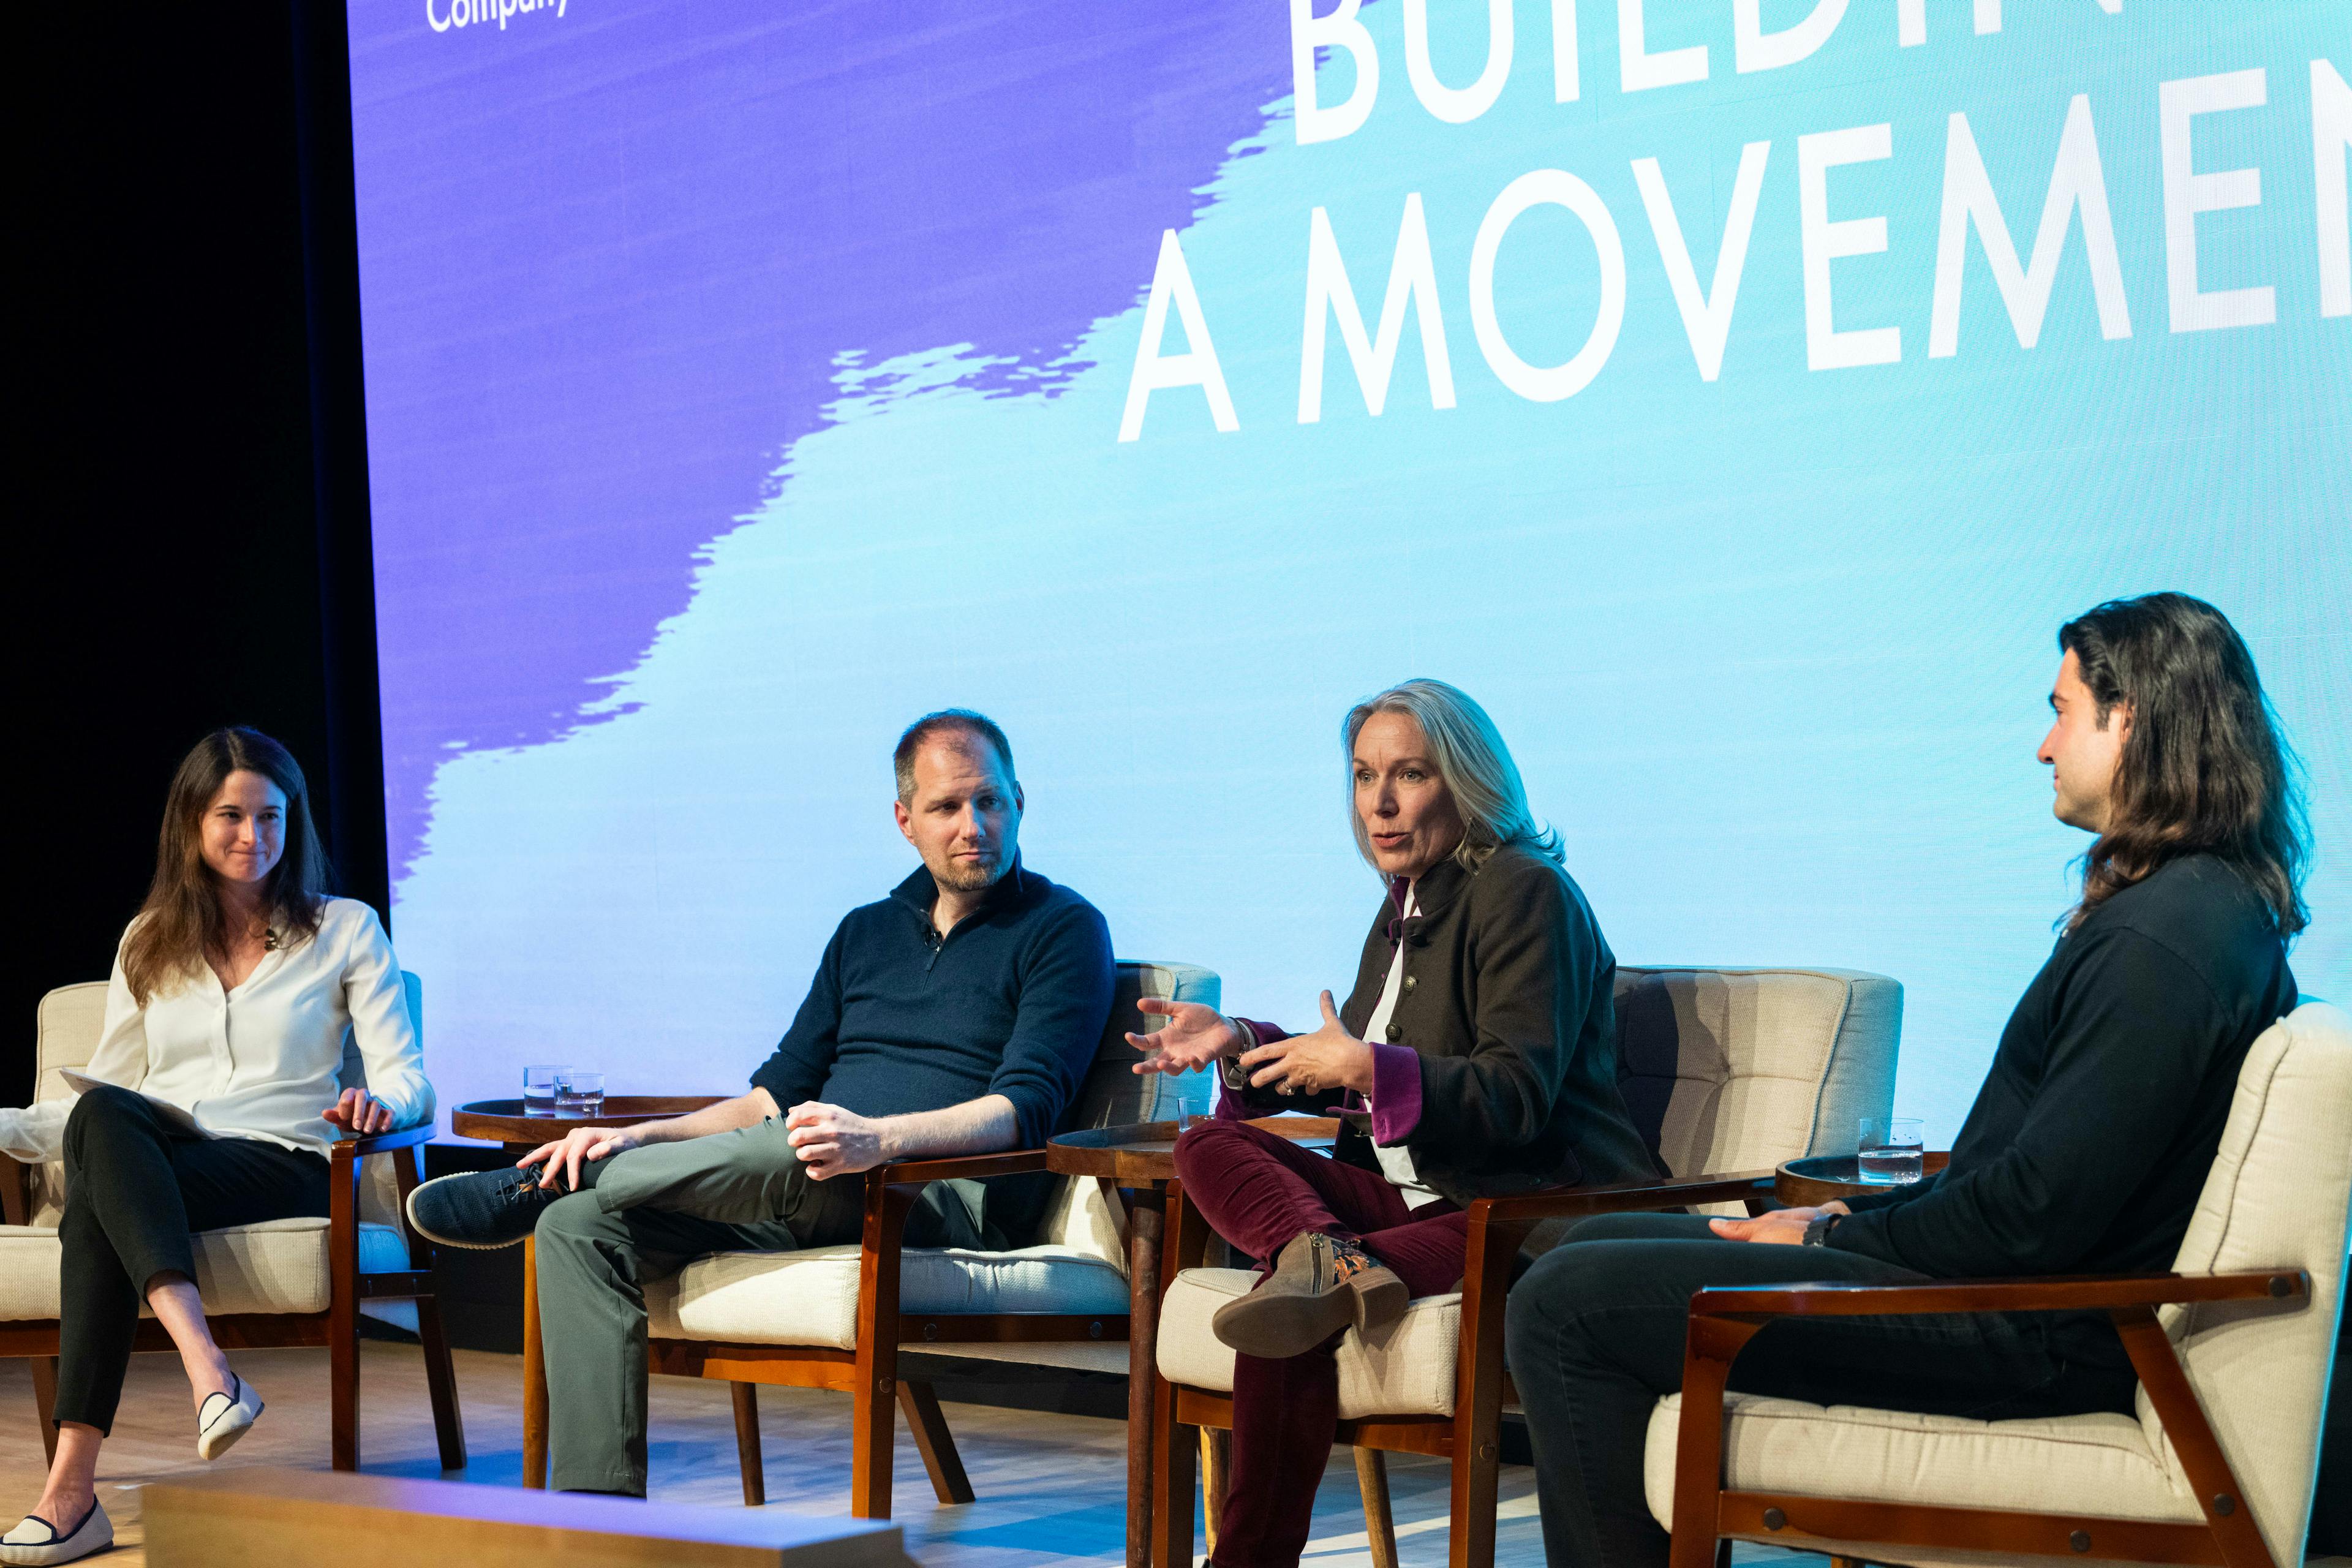 A panel of four people sitting on a stage, with "Building a movement" written in the background